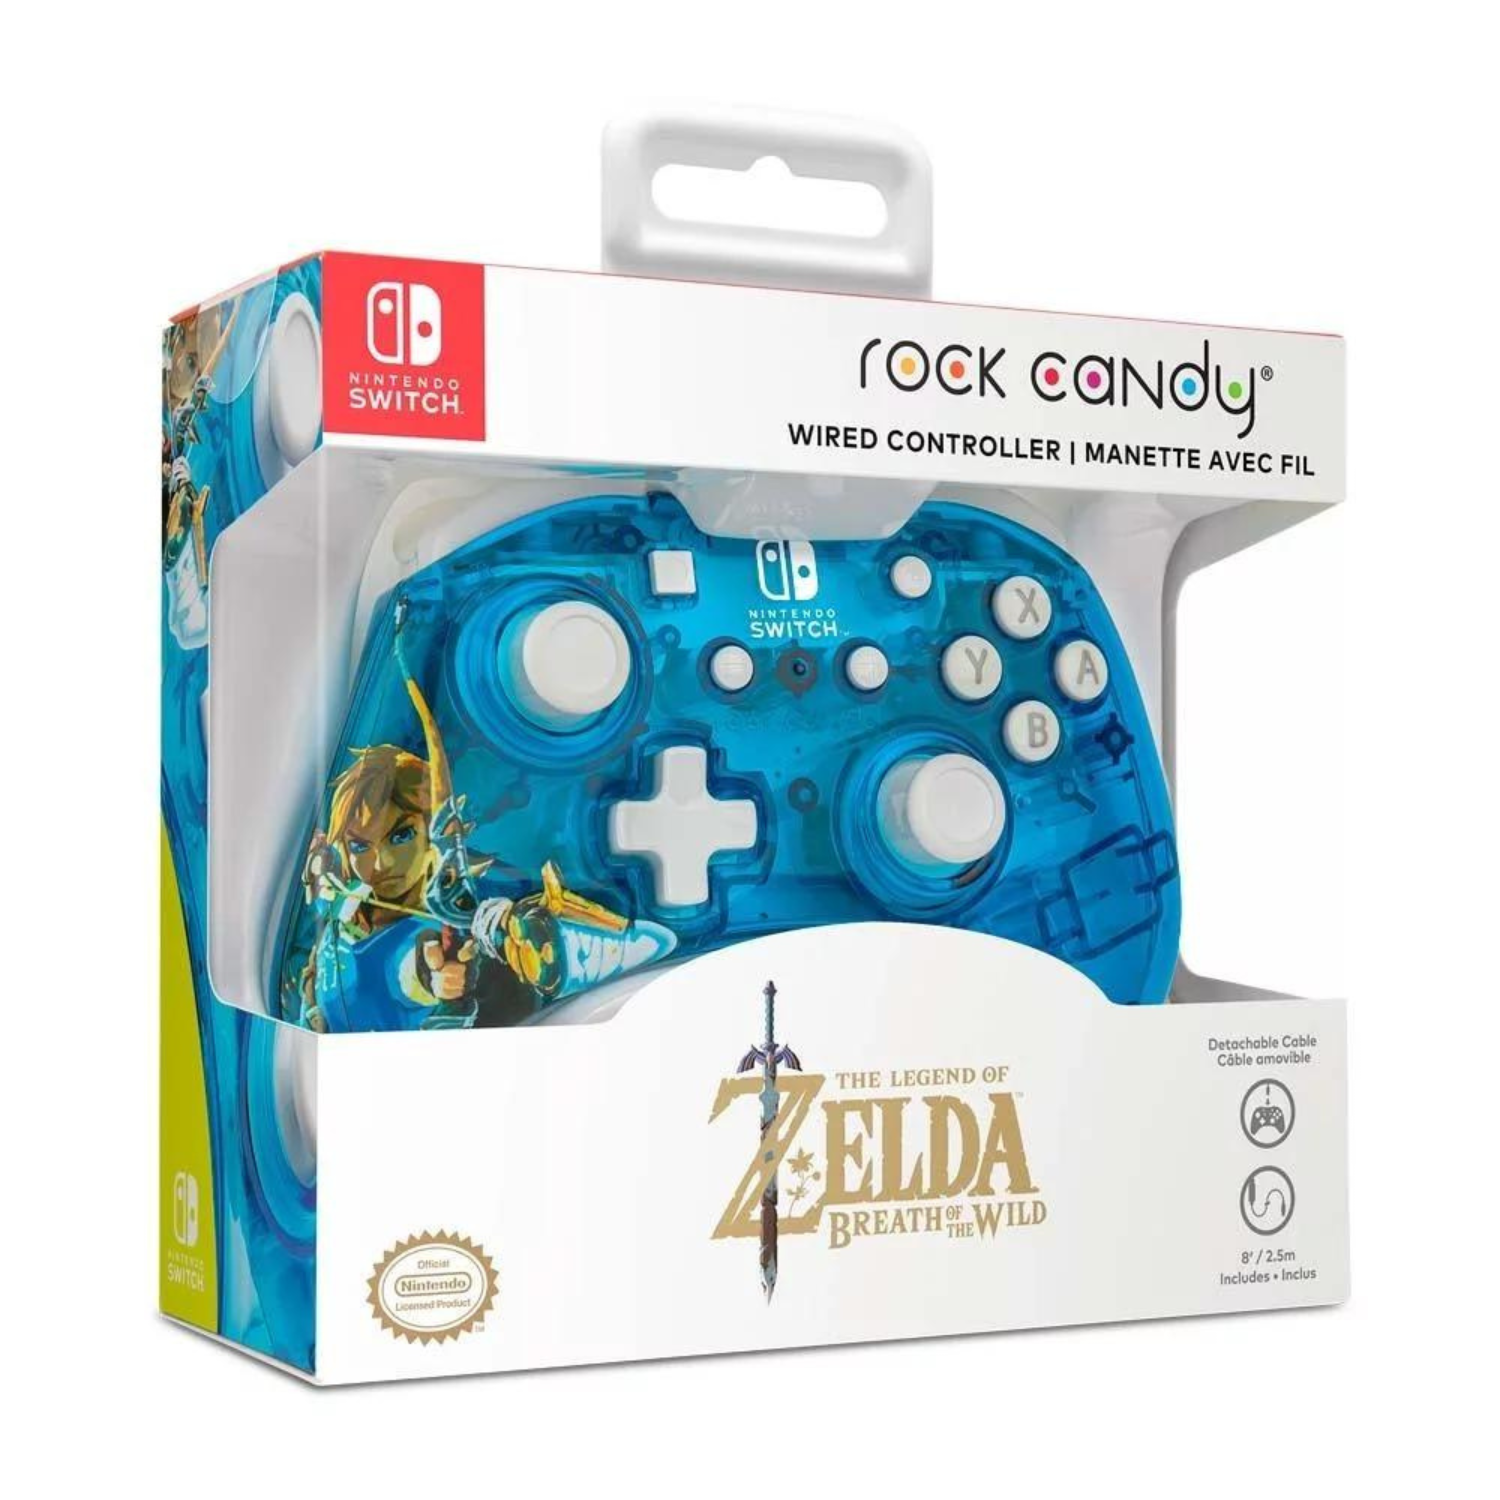 Wired Controller Manette Avec Fil Rock Candy TLOZ Breath of the Wild Nintendo Switch